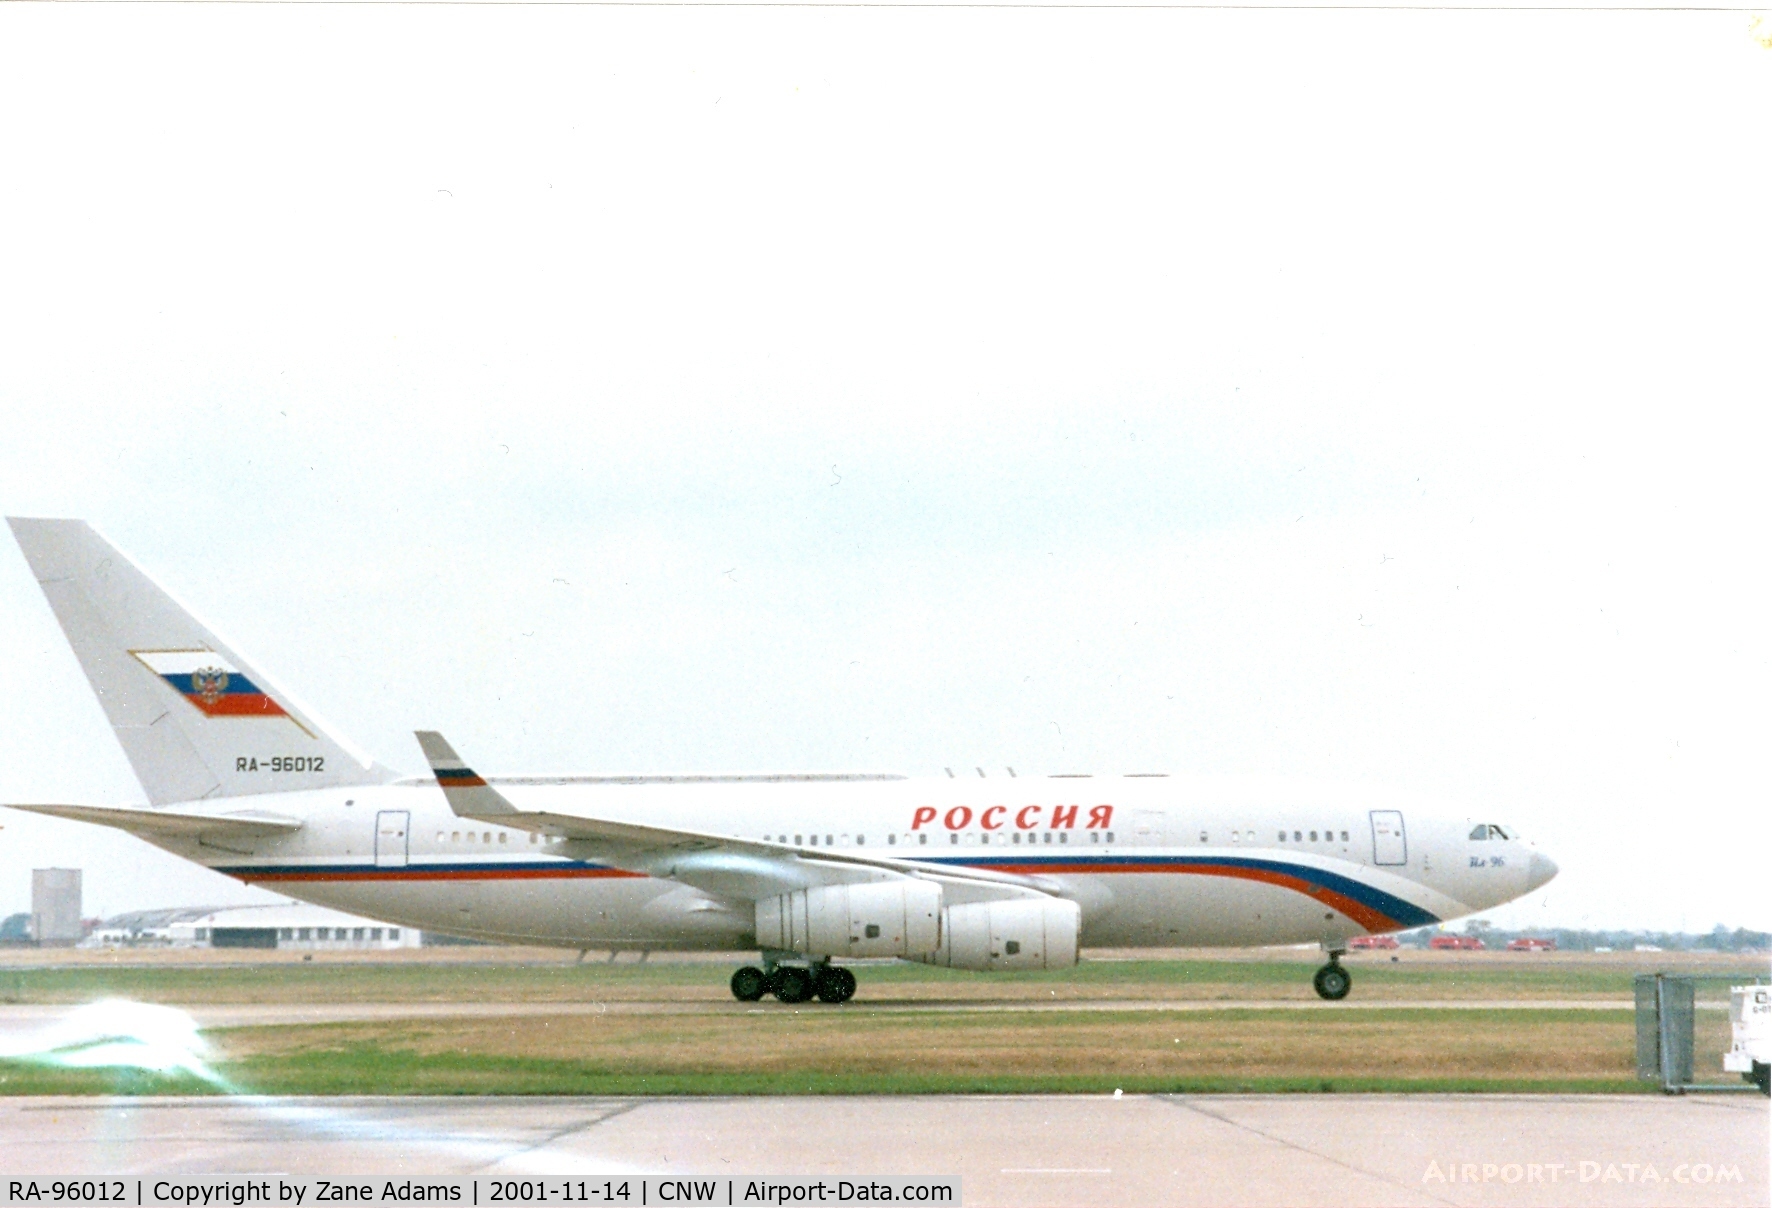 RA-96012, 1994 Ilyushin Il-96-300 C/N 74393201009, Russian President Valdimir Putin at Waco, TX on a state visit with U.S. President George W. Bush (Crawford, TX) Photo taken by Virgina Young (cousin) used with permission.